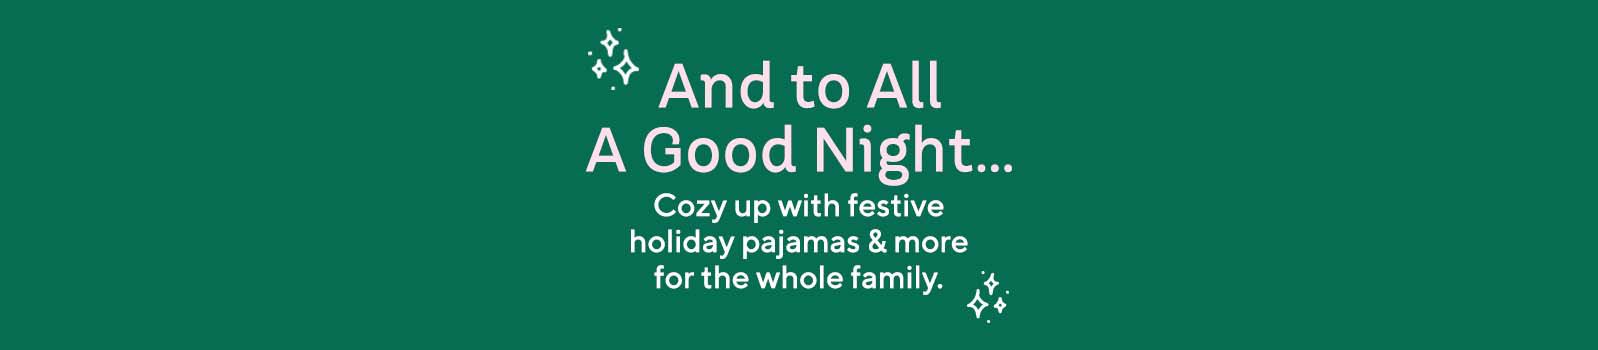 And to All A Good Night…  Cozy up with festive holiday pajamas & more for the whole family.